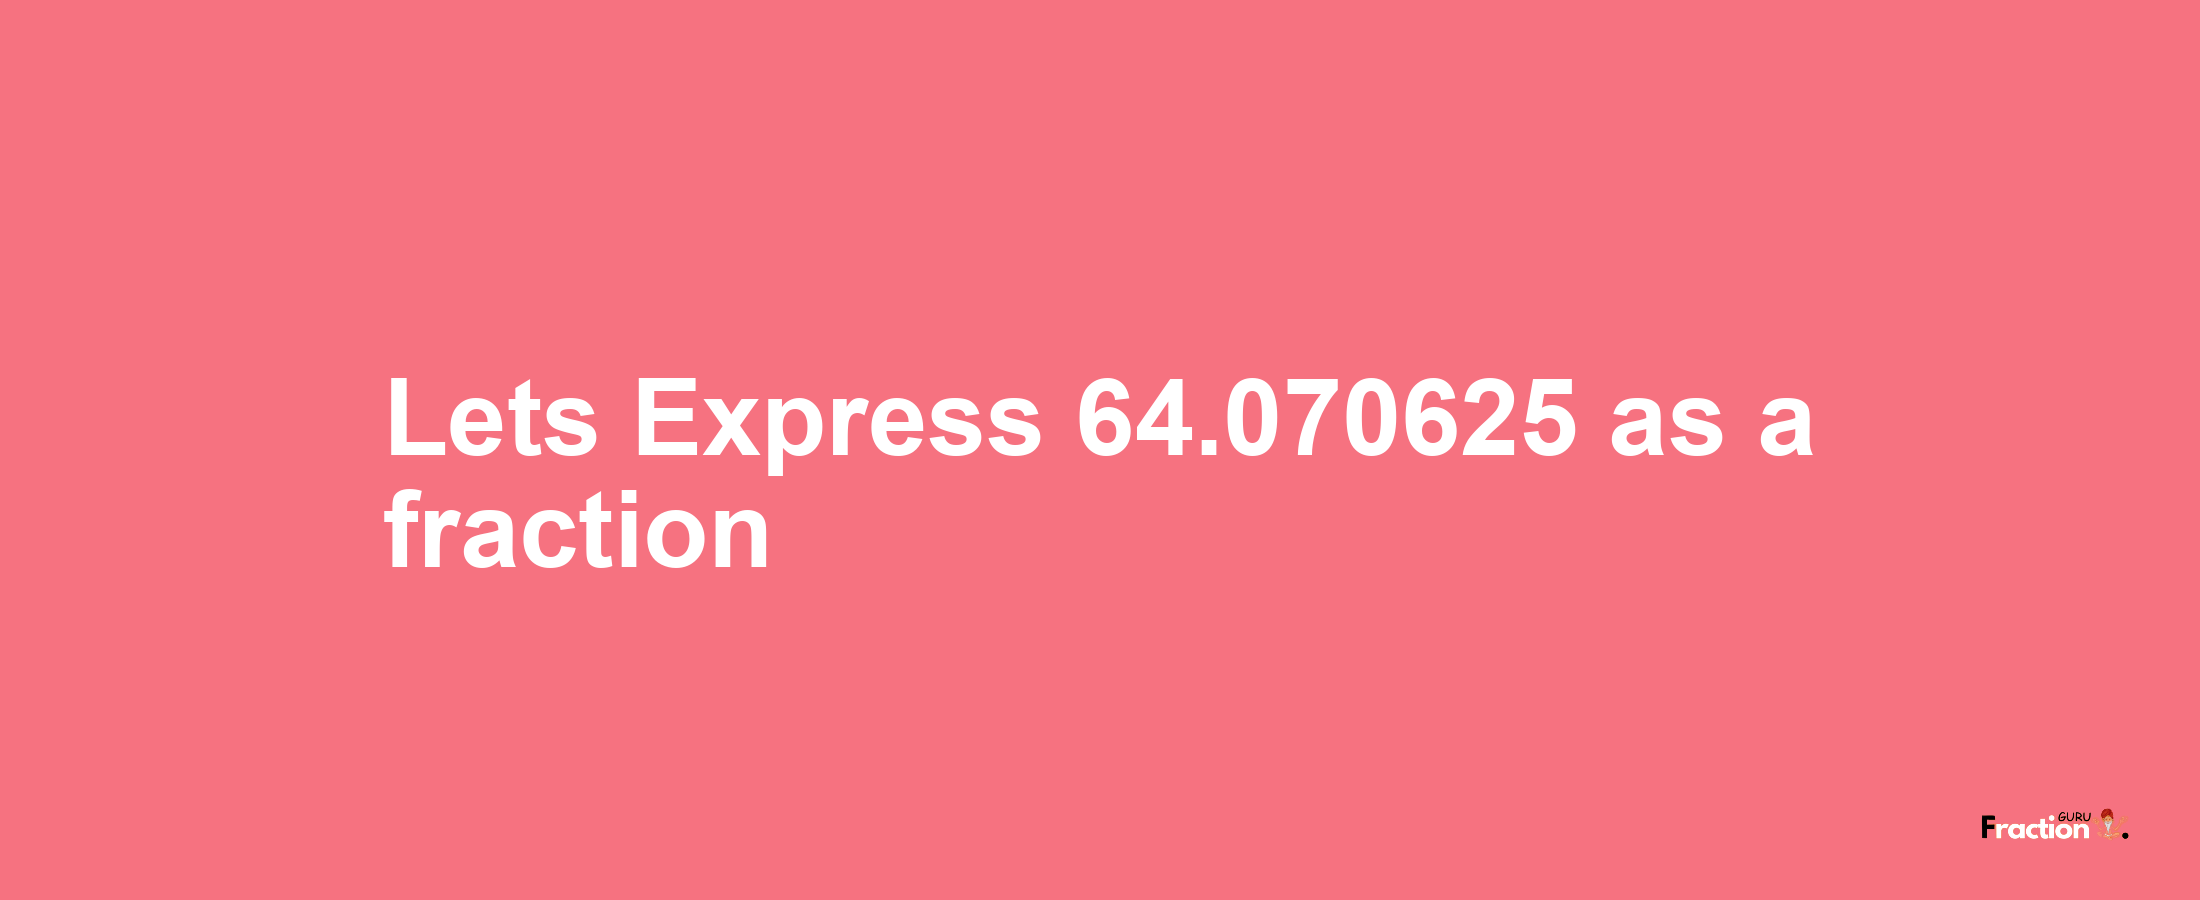 Lets Express 64.070625 as afraction